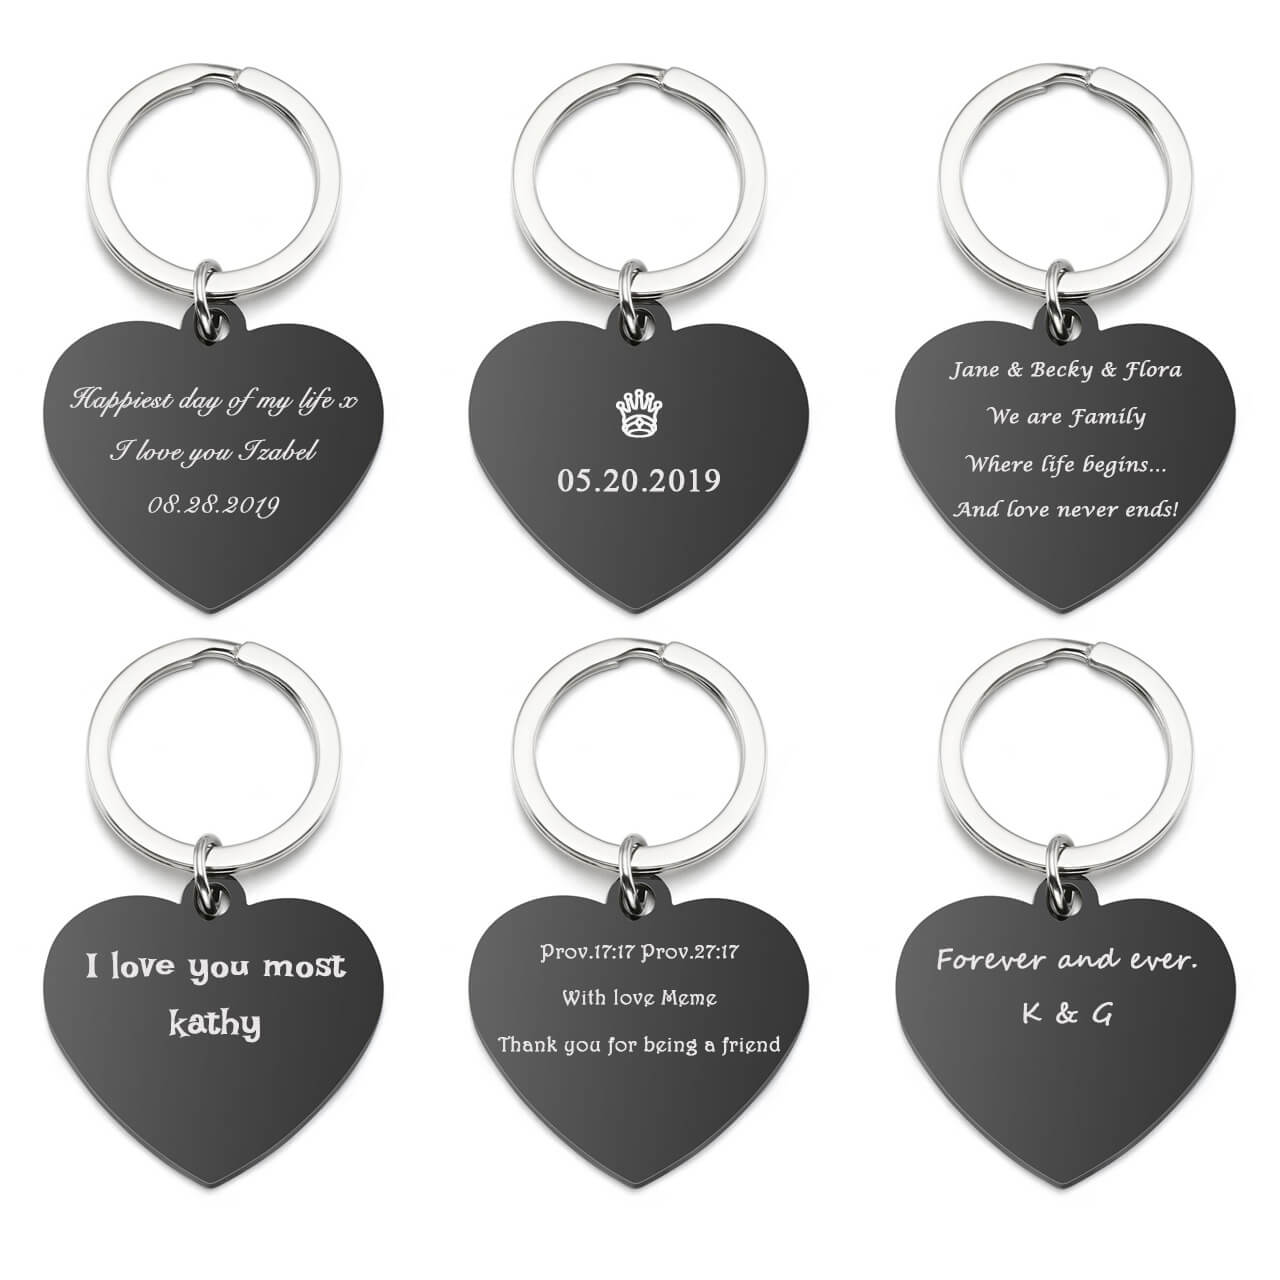 Jovivi customized messages anniversary keychain for couples